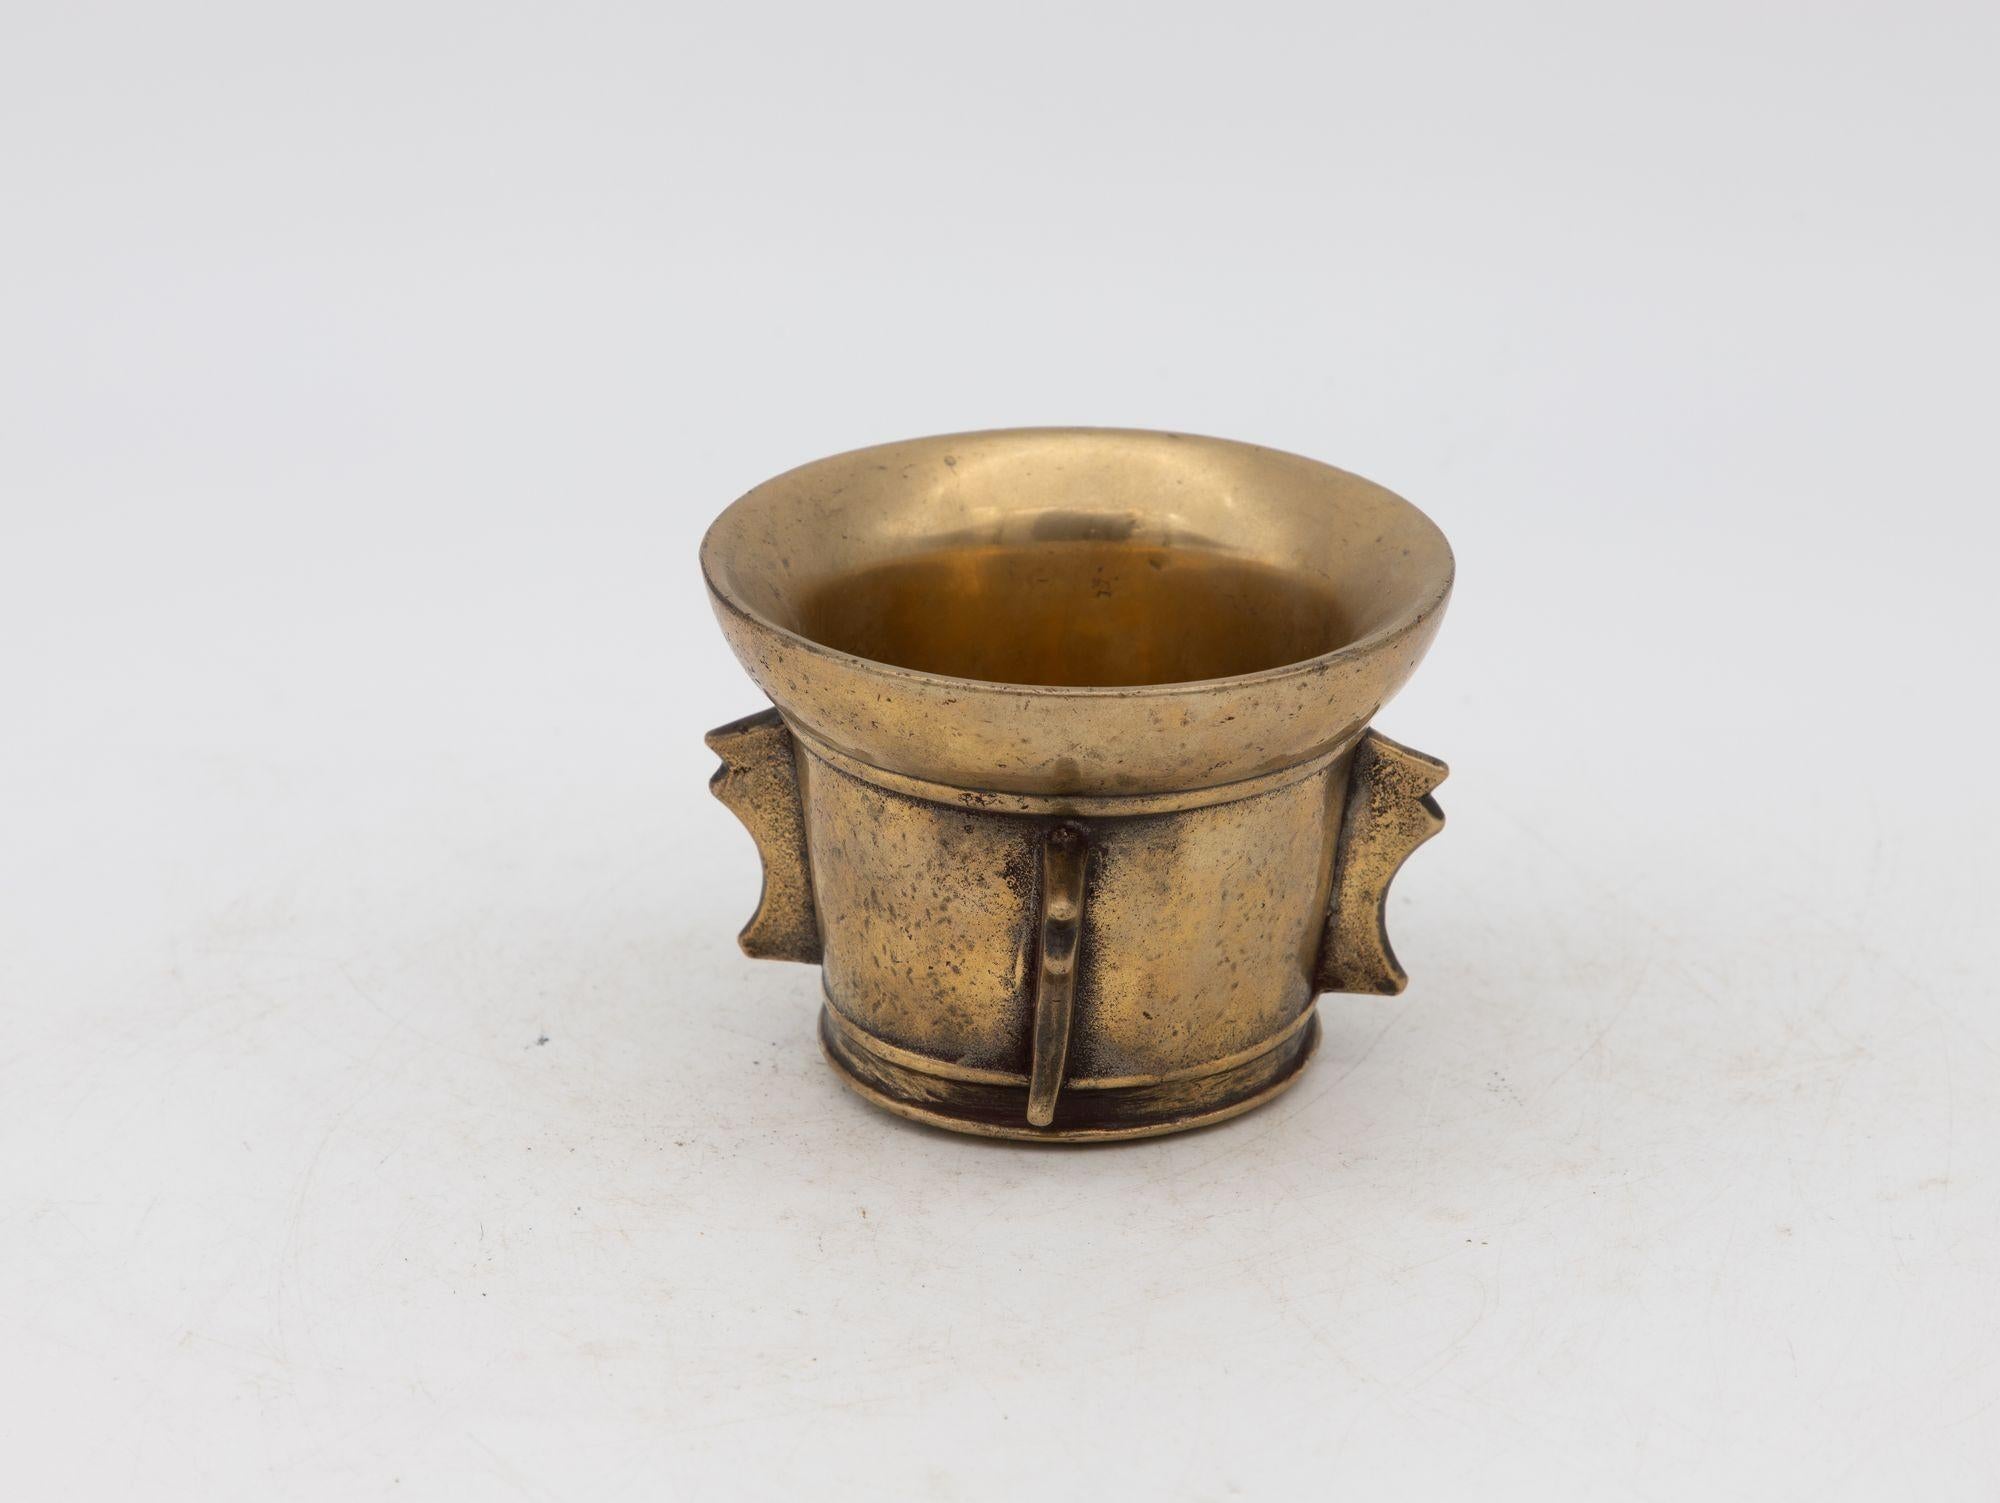 This early 20th-century mortar is made of brass with an honest patina. The mortar is traditional in style. The mortar has a classic bell-shaped body. Brass mortar and pestles were used for both food and apothecary. This makes a lovely decorative